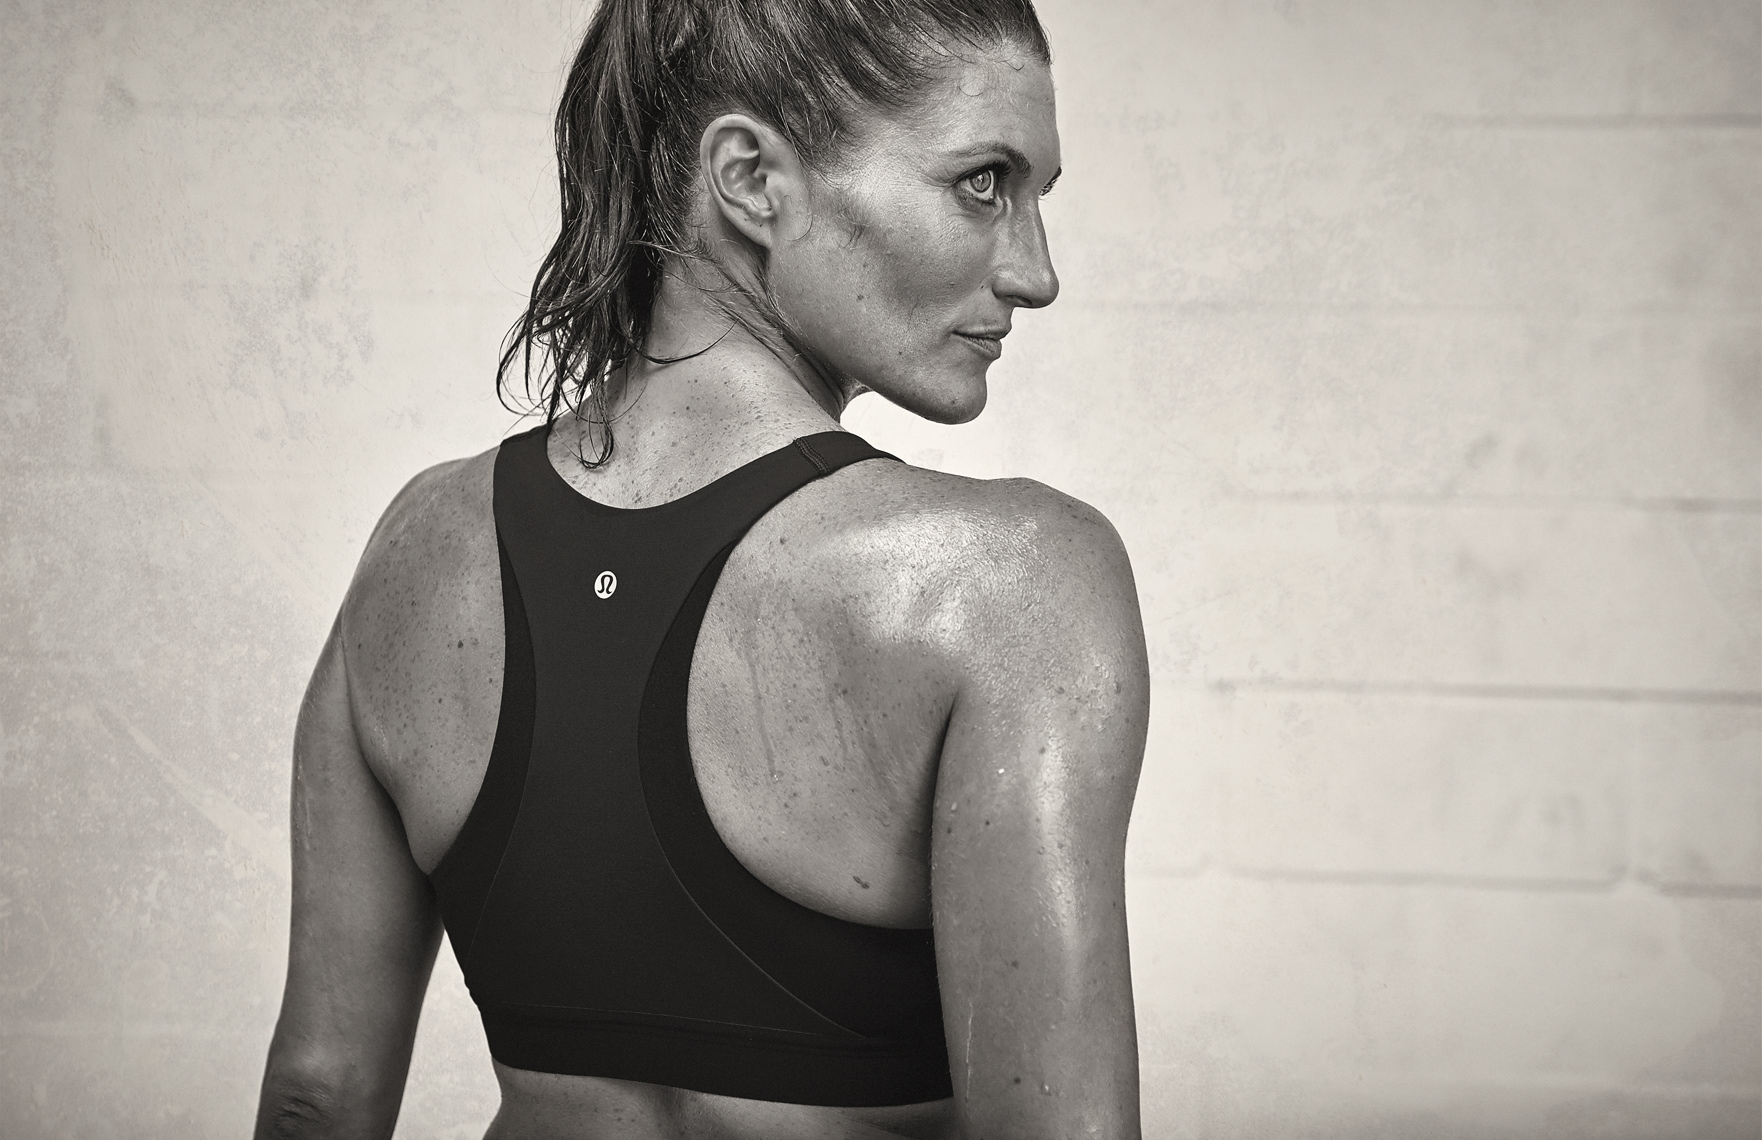 lululemon advertising campaign with female athlete wearing sportswear by Vancouver advertising photographer Waldy Martens